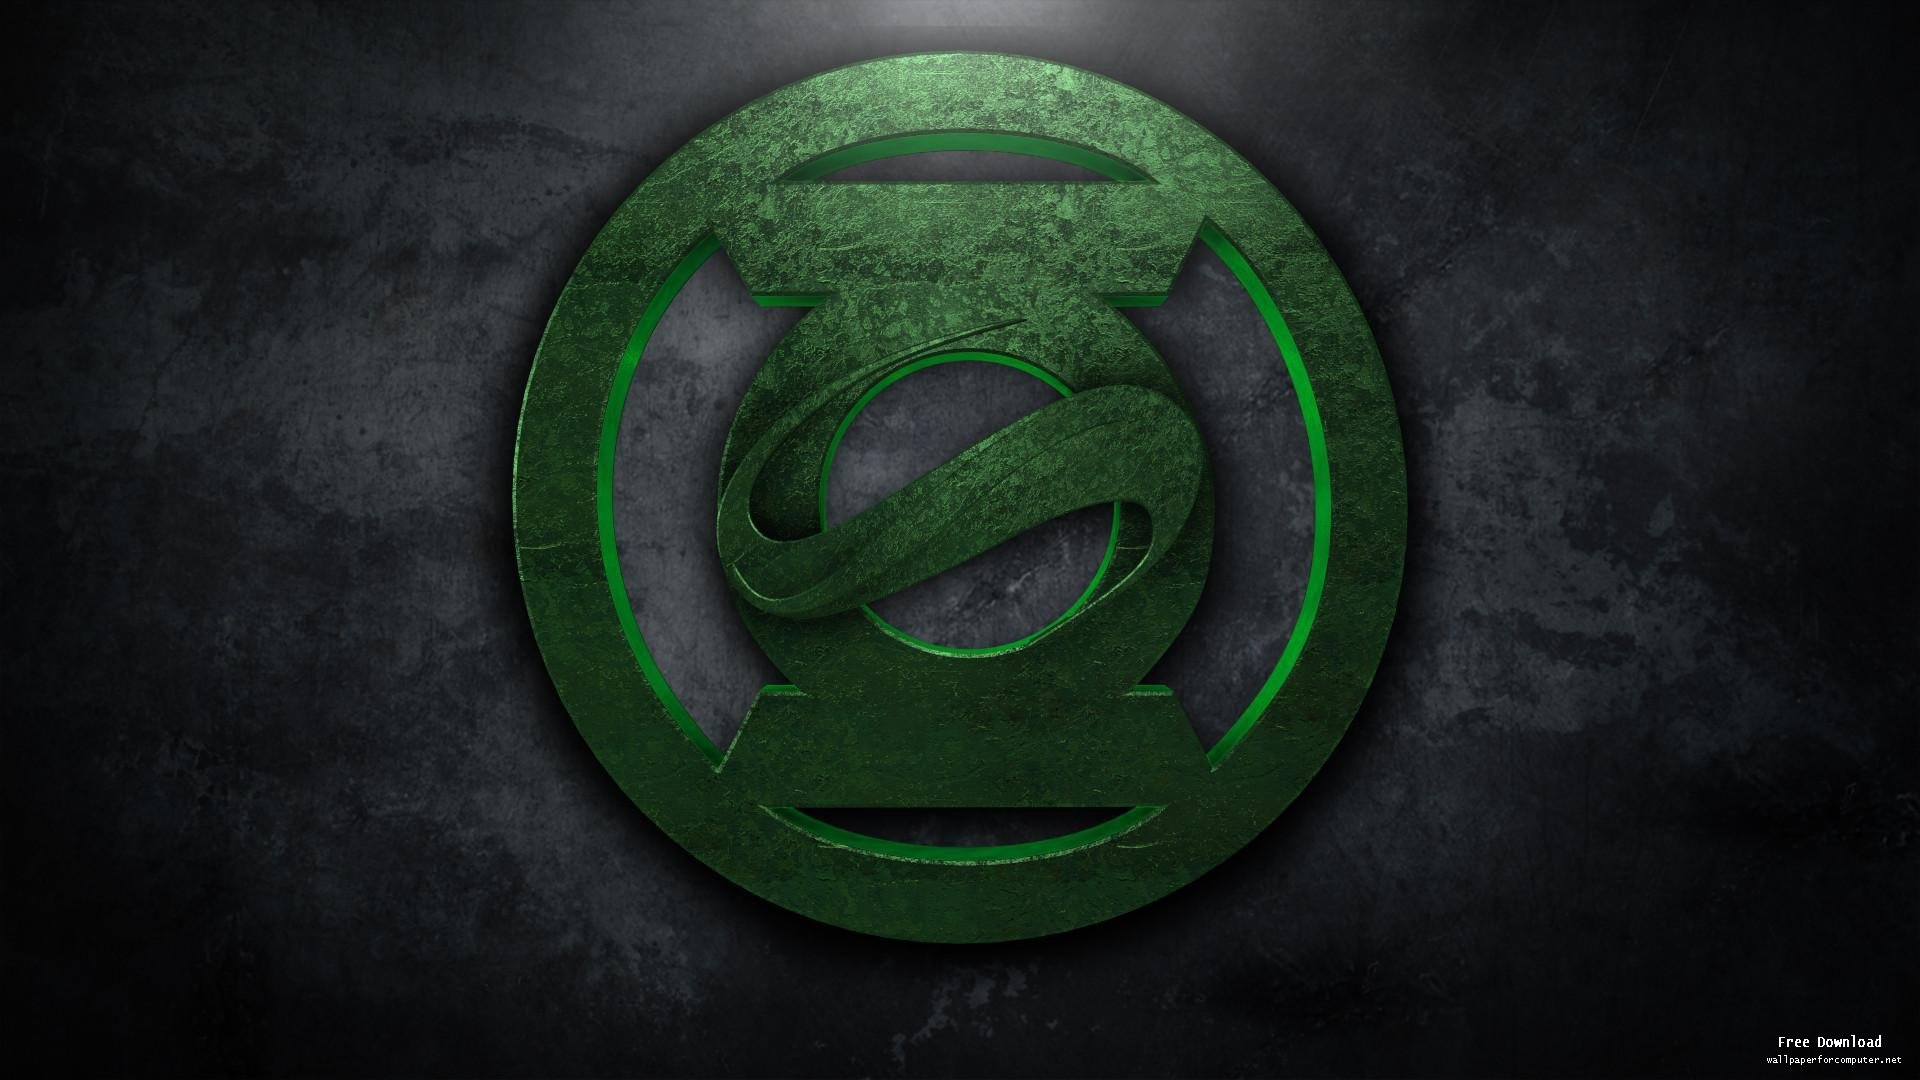 Green Lantern logo Wallpapers for Computer 218   HD Wallpapers Site 1920x1080